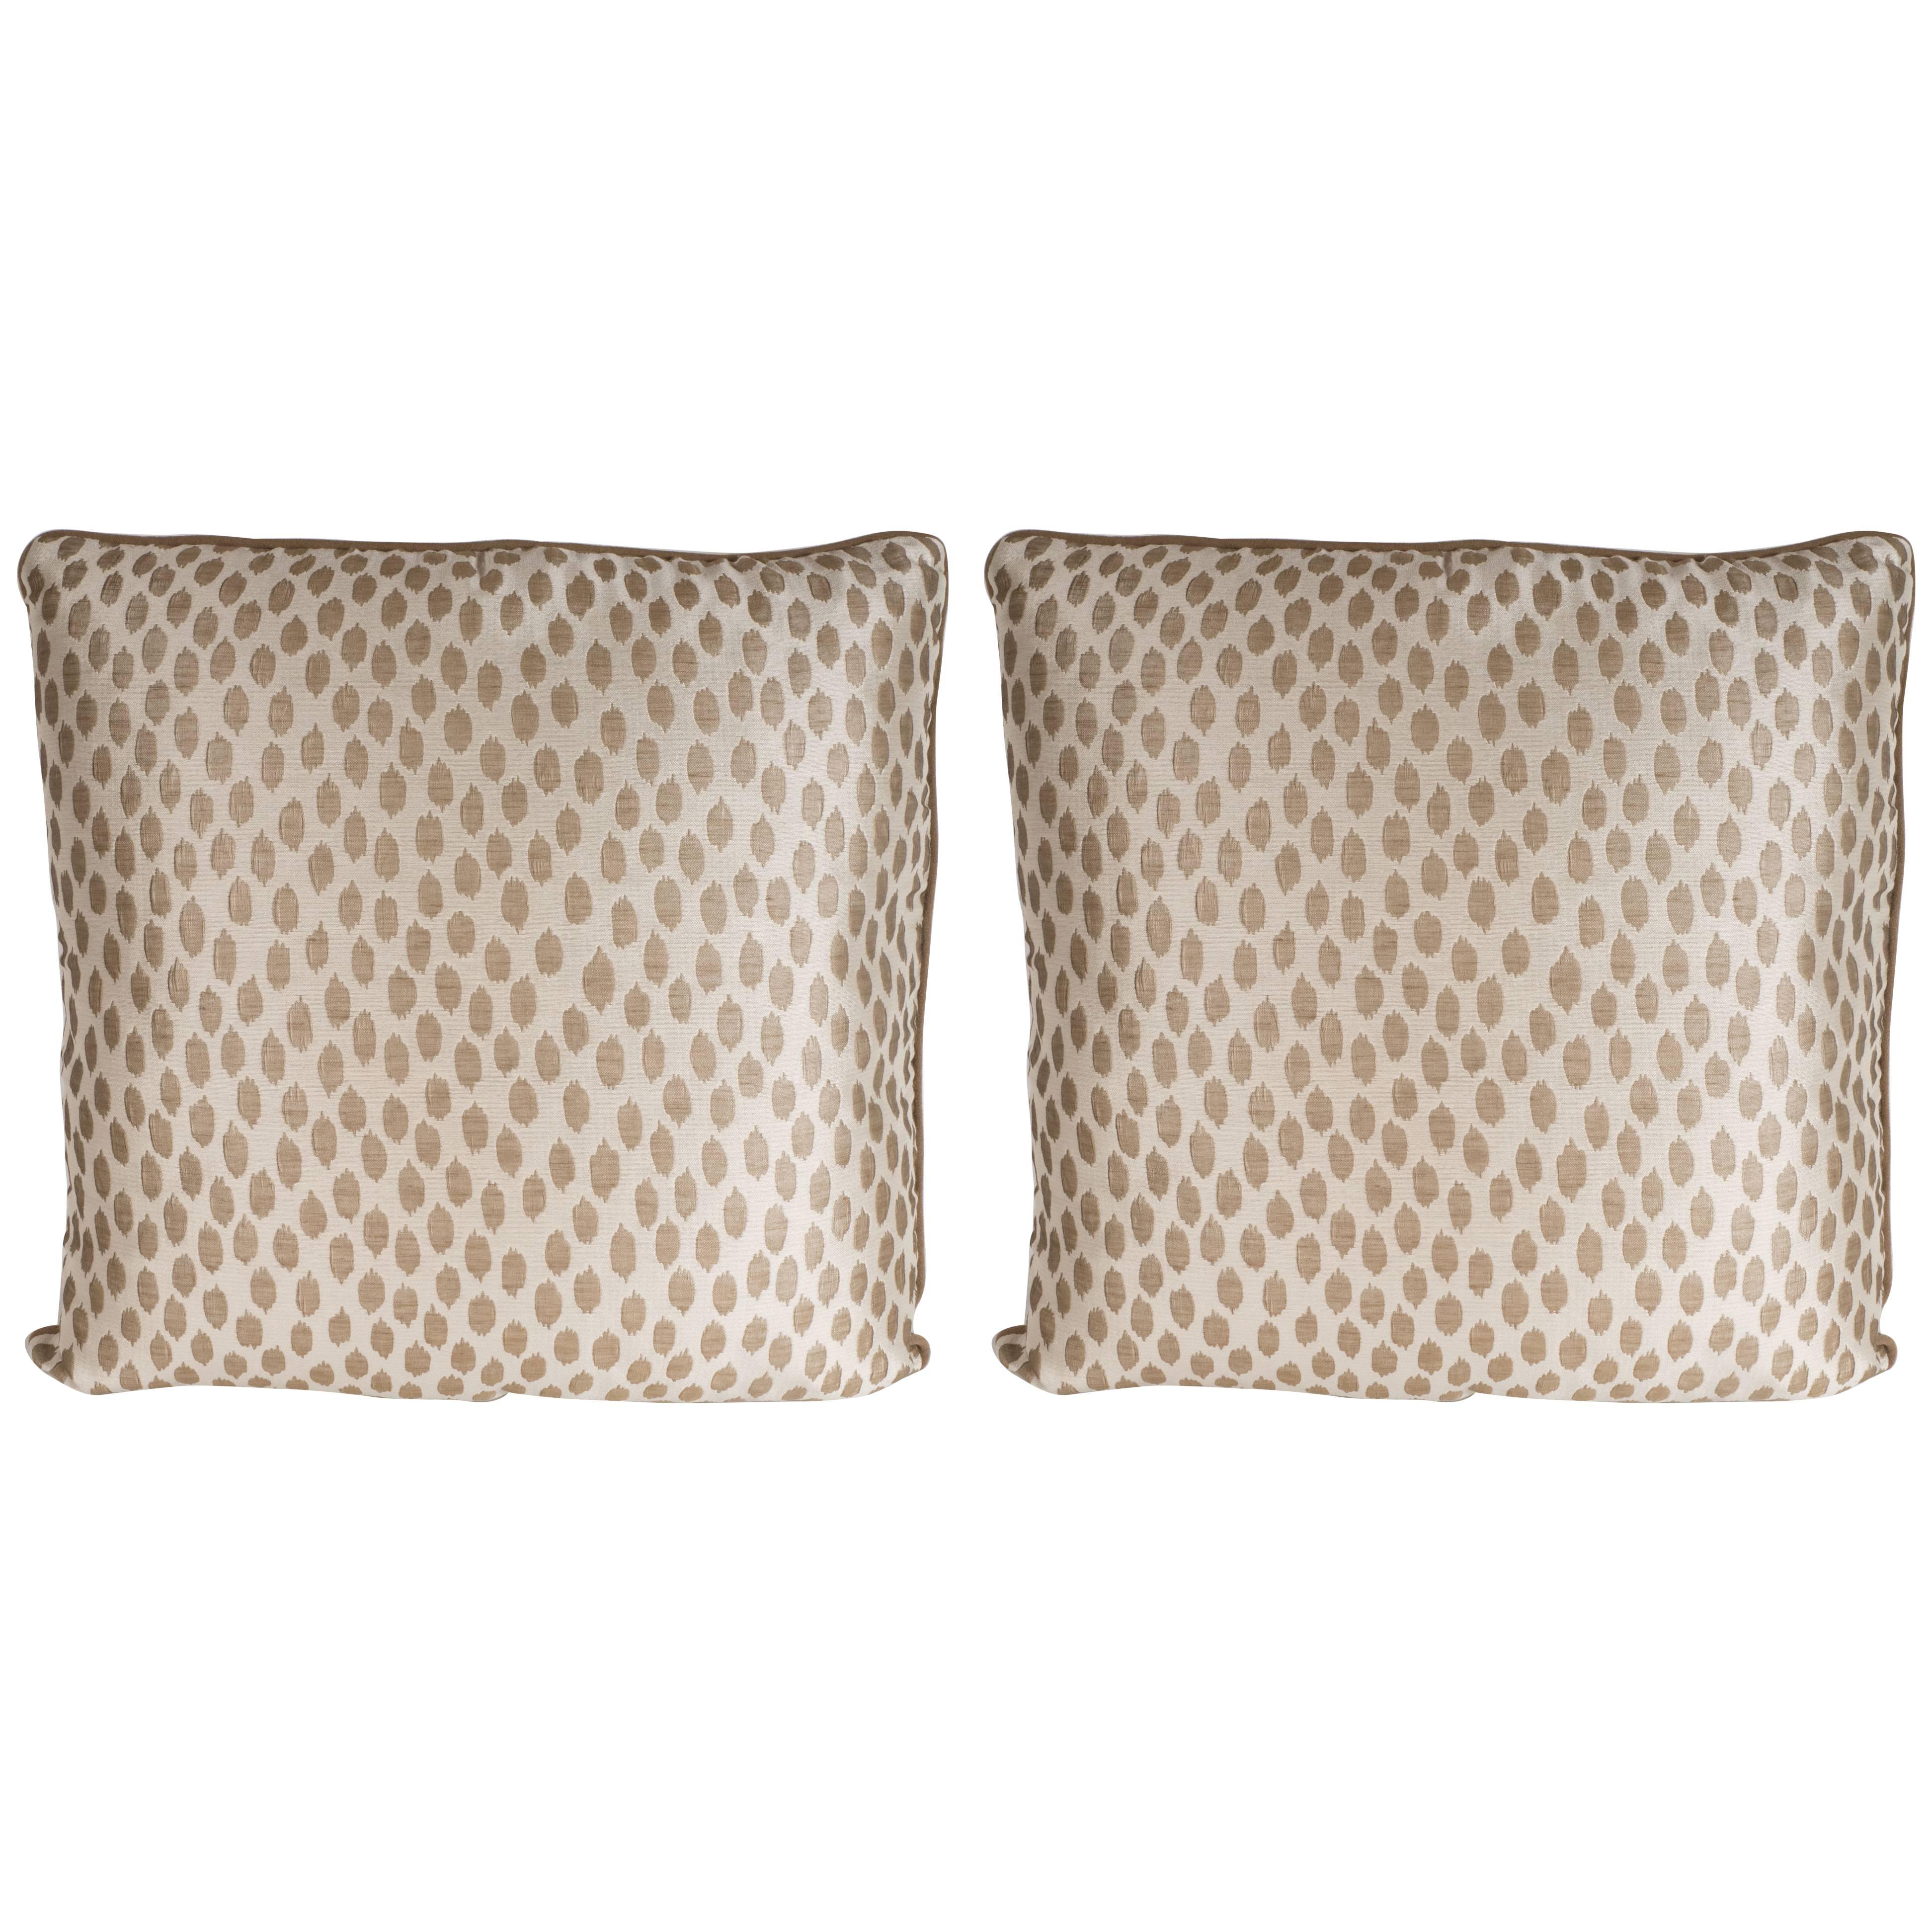 Pair of Modernist Square Pillows in Ecru and Muted Gold Tones with Piping Detail